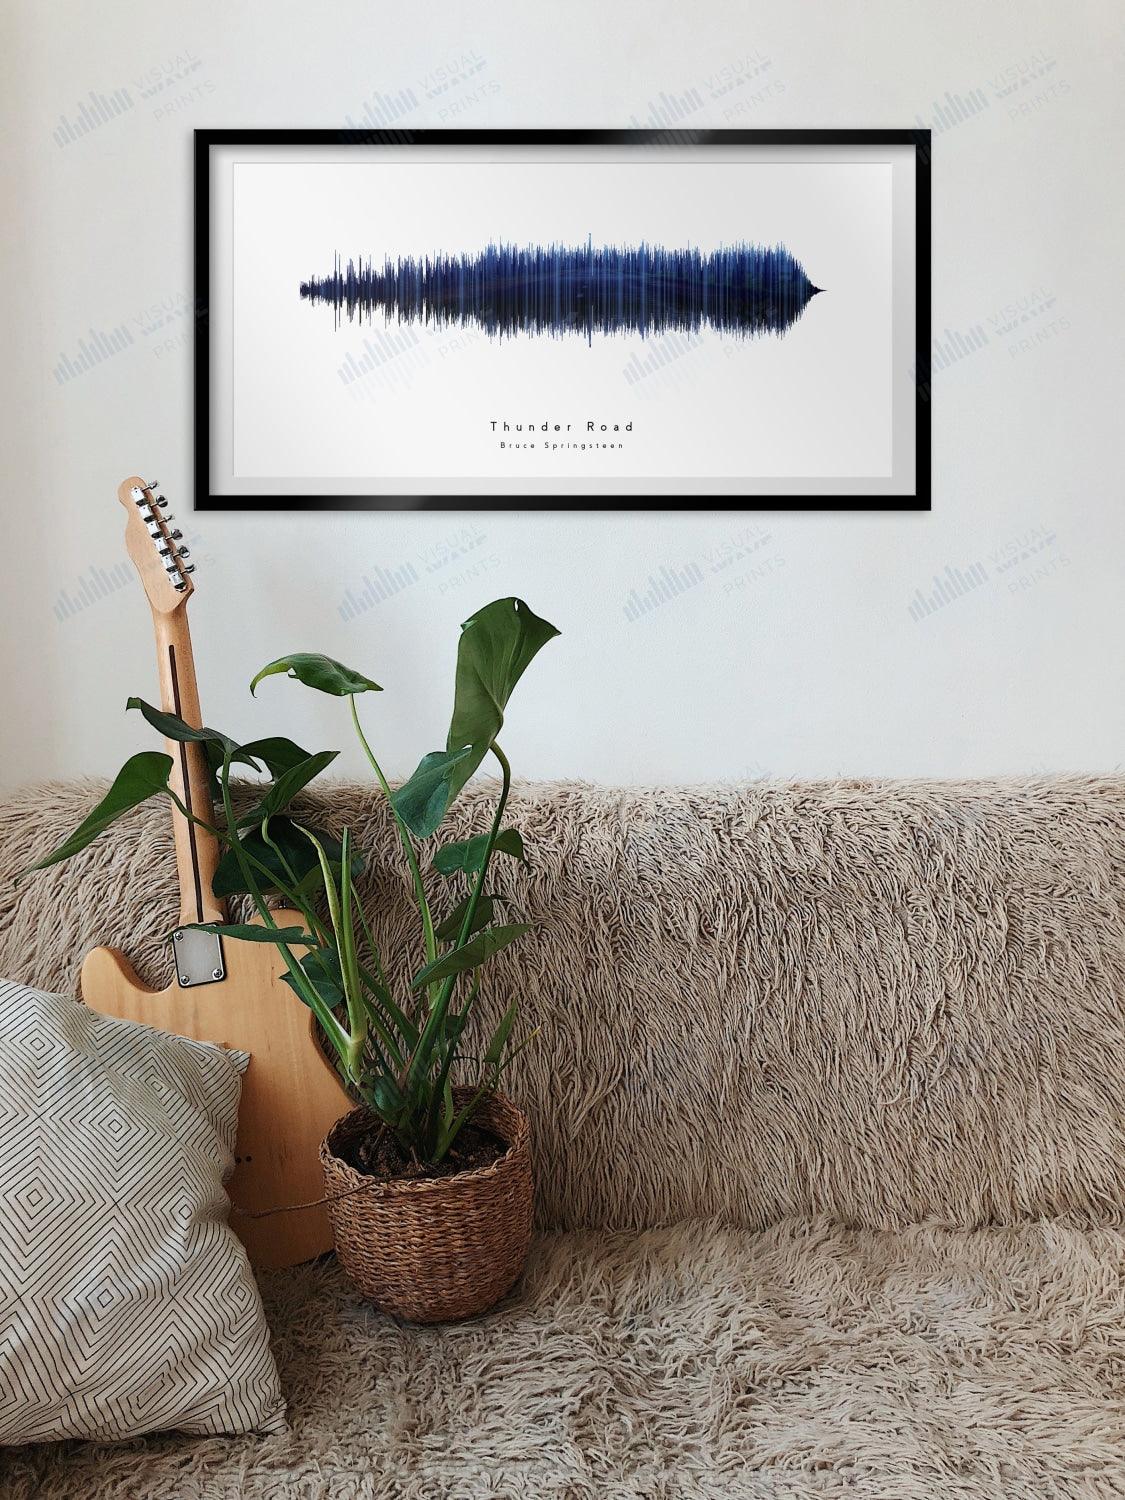 Thunder Road by Bruce Springsteen - Visual Wave Prints